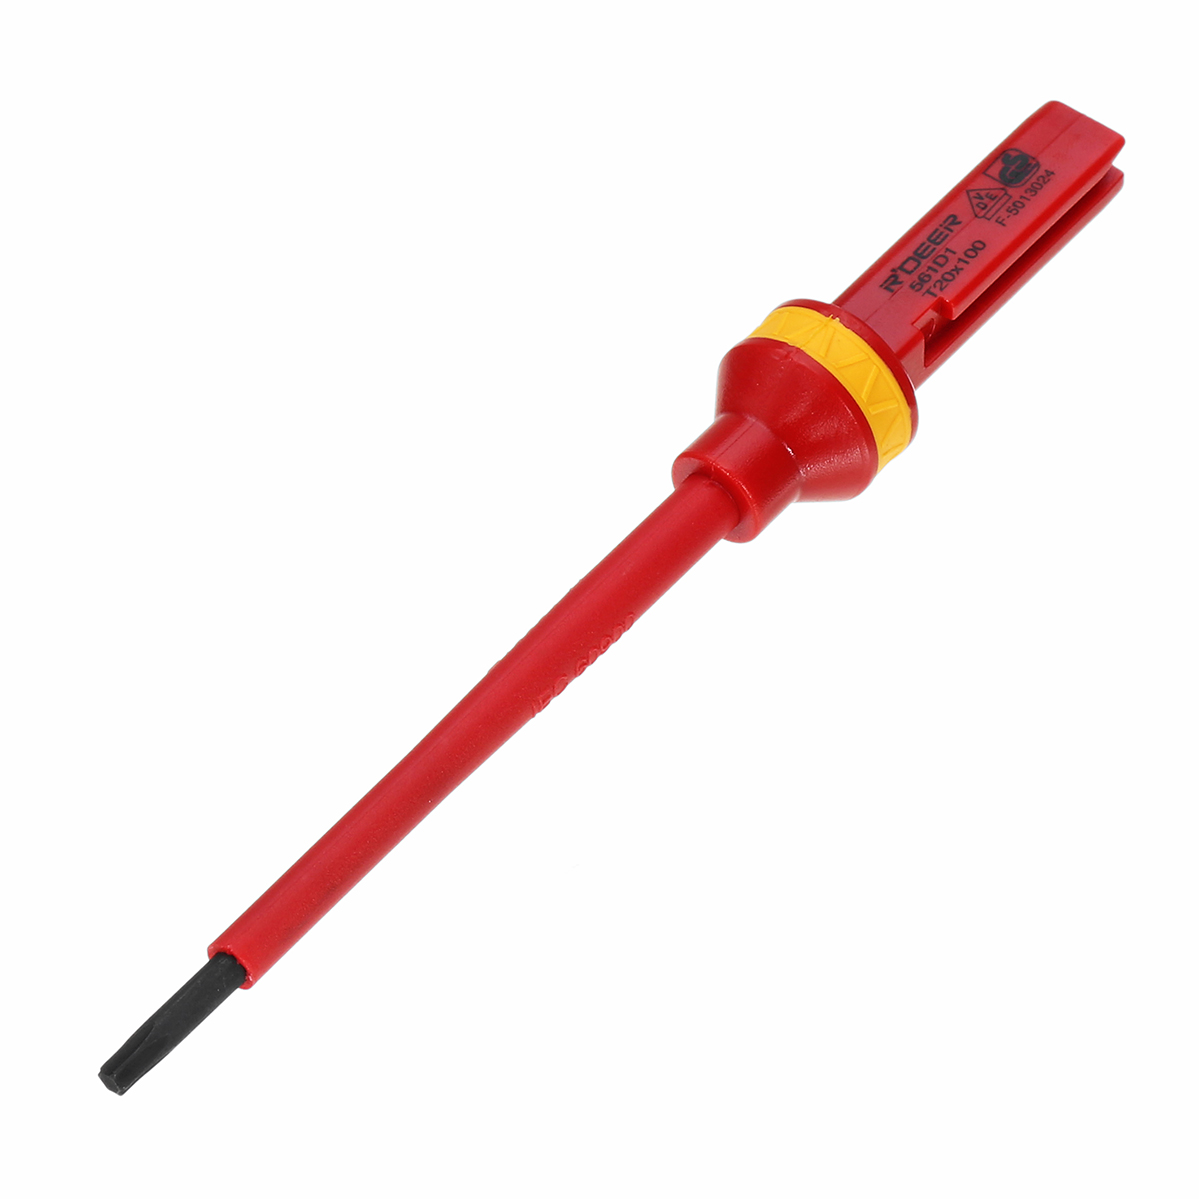 13Pcs-1000V-Electronic-Insulated-Screwdriver-Set-Phillips-Slotted-Torx-CR-V-Screwdriver-Hand-Tools-1224521-8